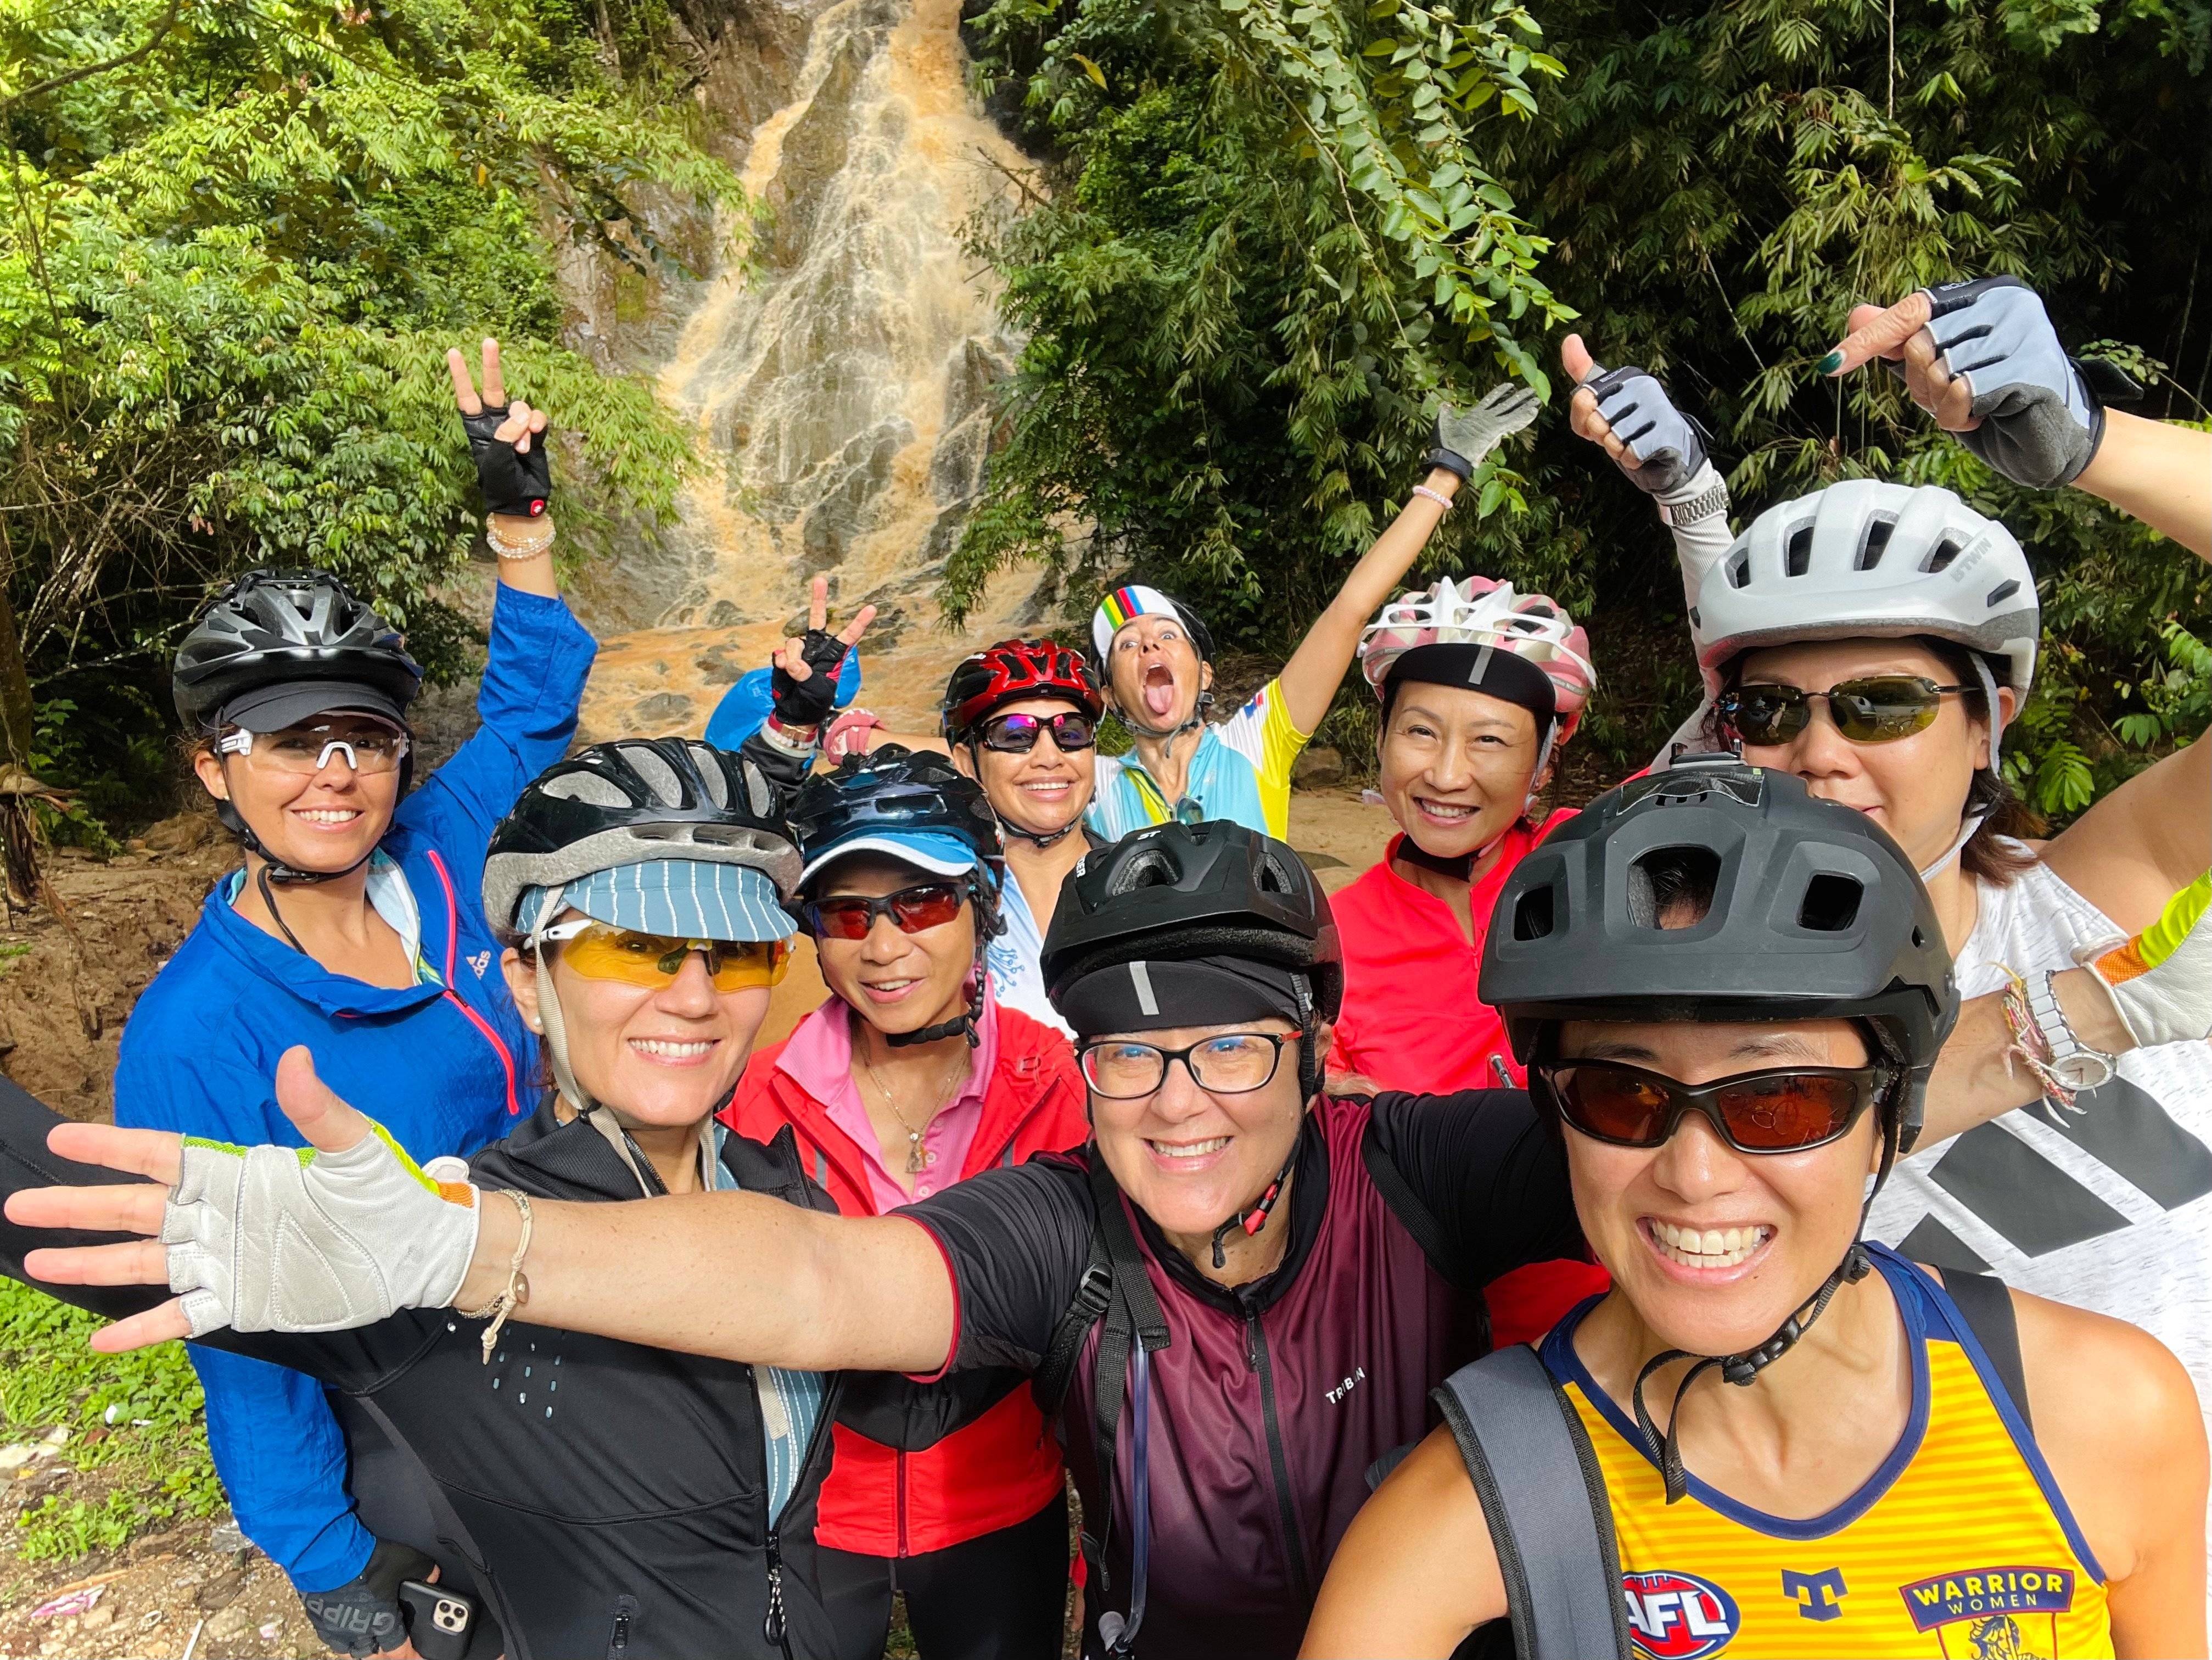 The cyclists of Malaysia’s Bike in Nature group gather regularly to ride through the jungle around Kuala Lumpur, keep fit and socialise. Photo: Ling Teo